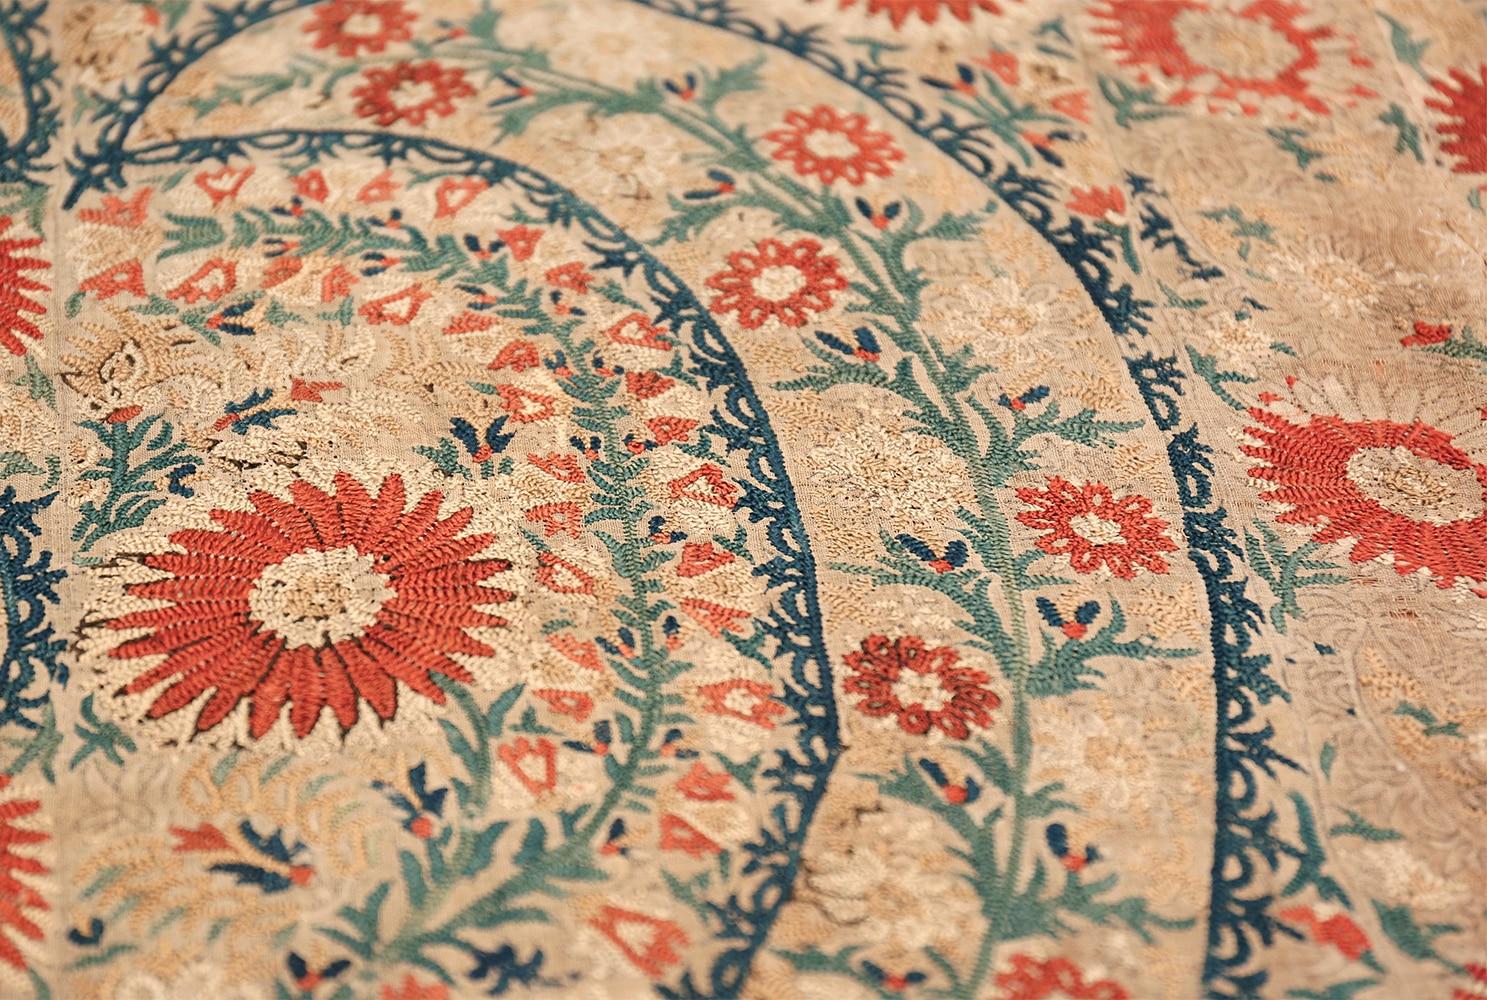 Turkish Refined Yet Rustic Antique Ottoman Textile Embroidery 3'2